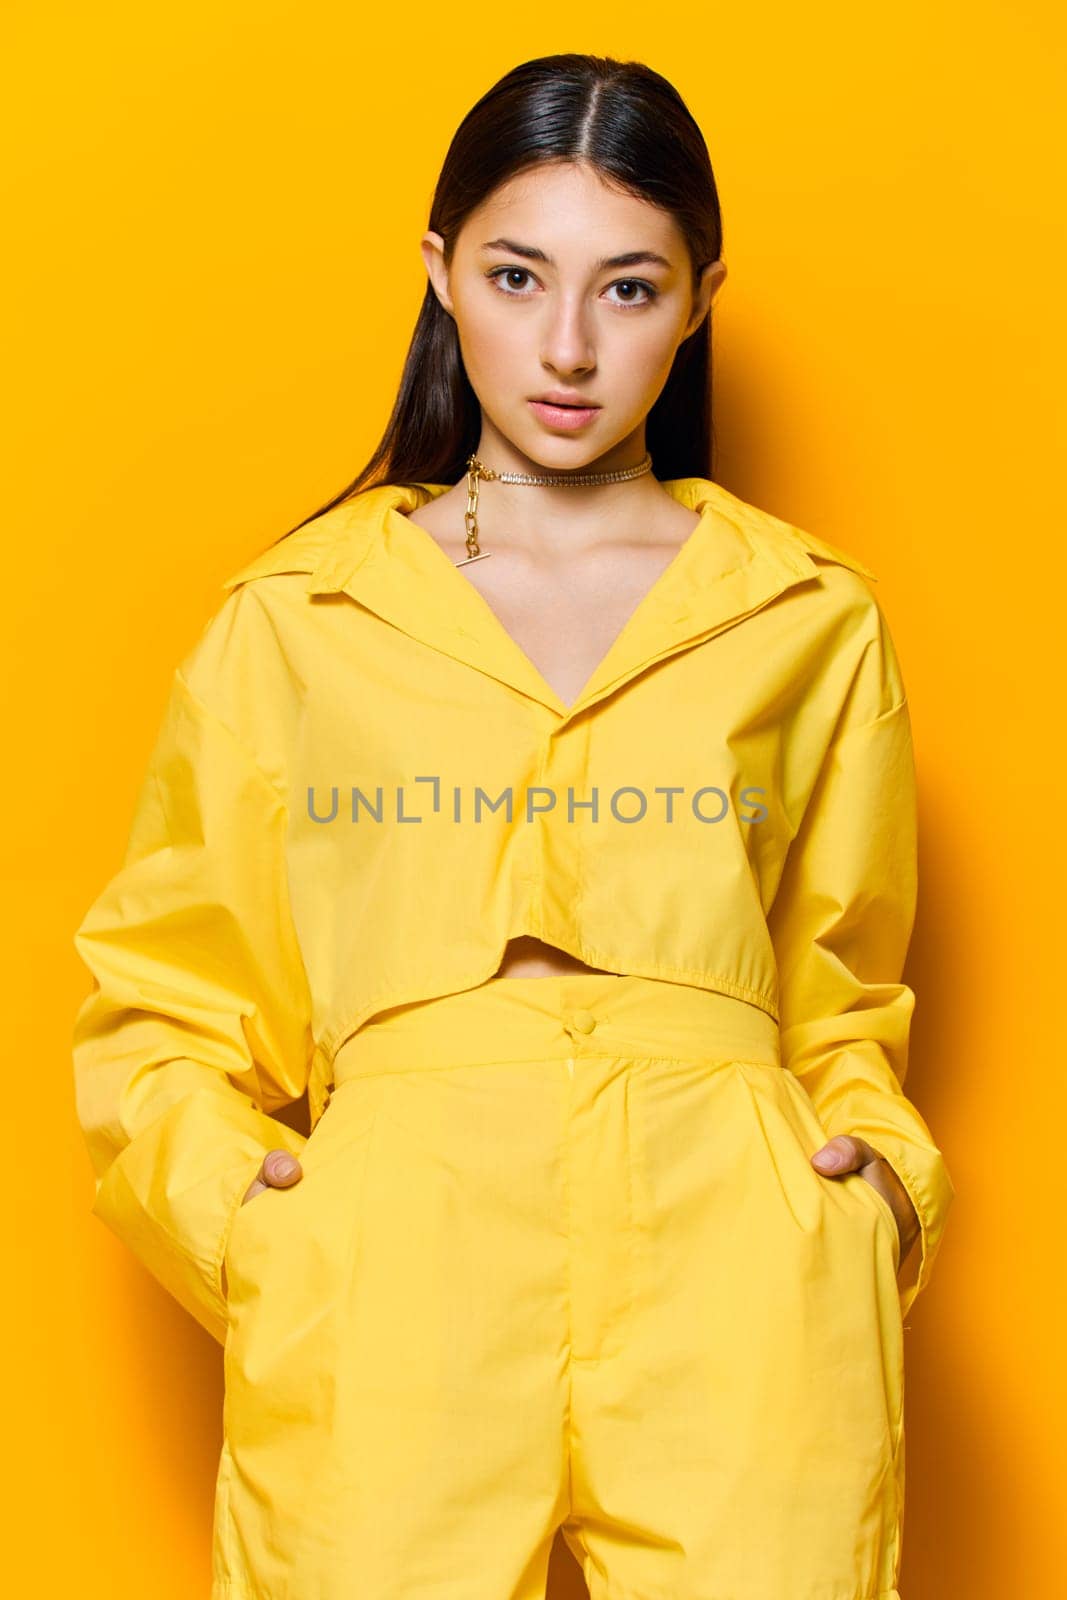 beautiful woman young girl trendy model fashion attractive yellow glamour lifestyle by SHOTPRIME